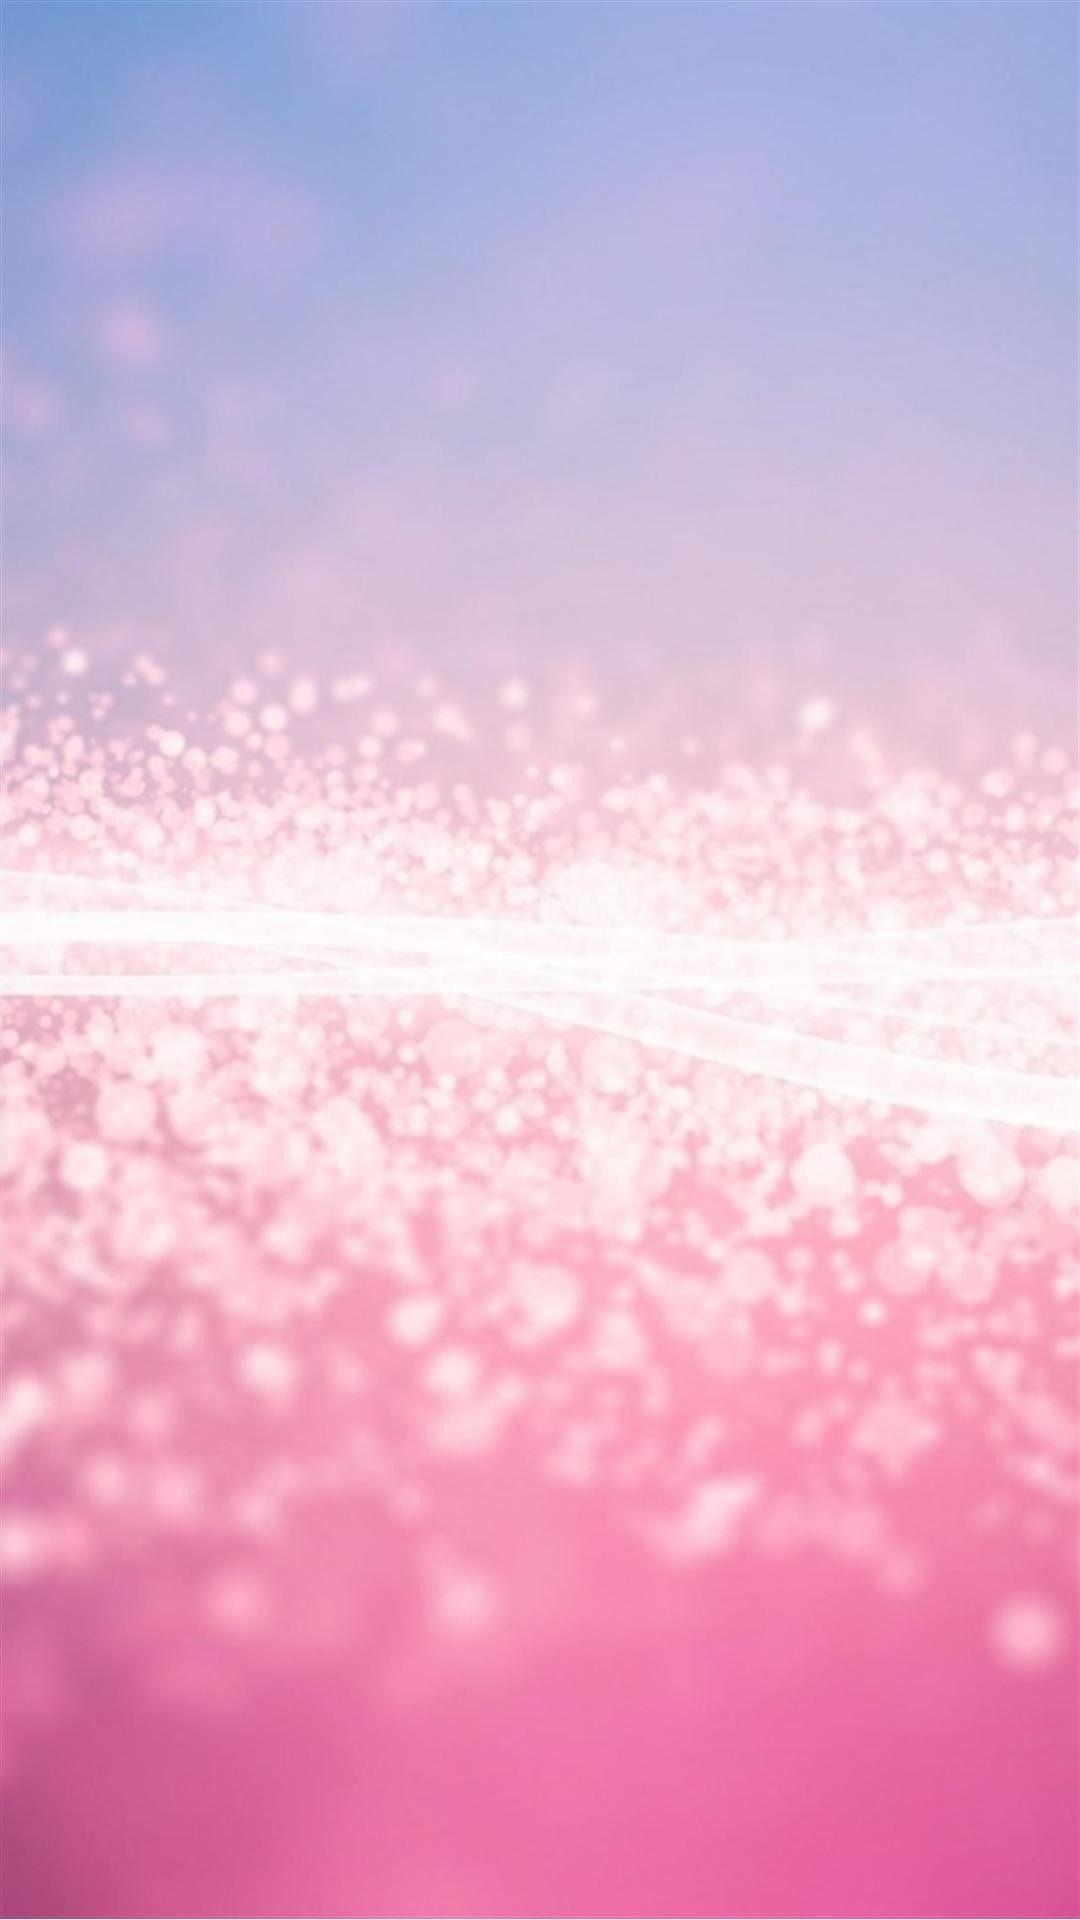 Shiny pink glitter textured background  free image by rawpixelcom  Teddy  Rawpixel  Pink glitter wallpaper Pink wallpaper backgrounds Pink  wallpaper iphone